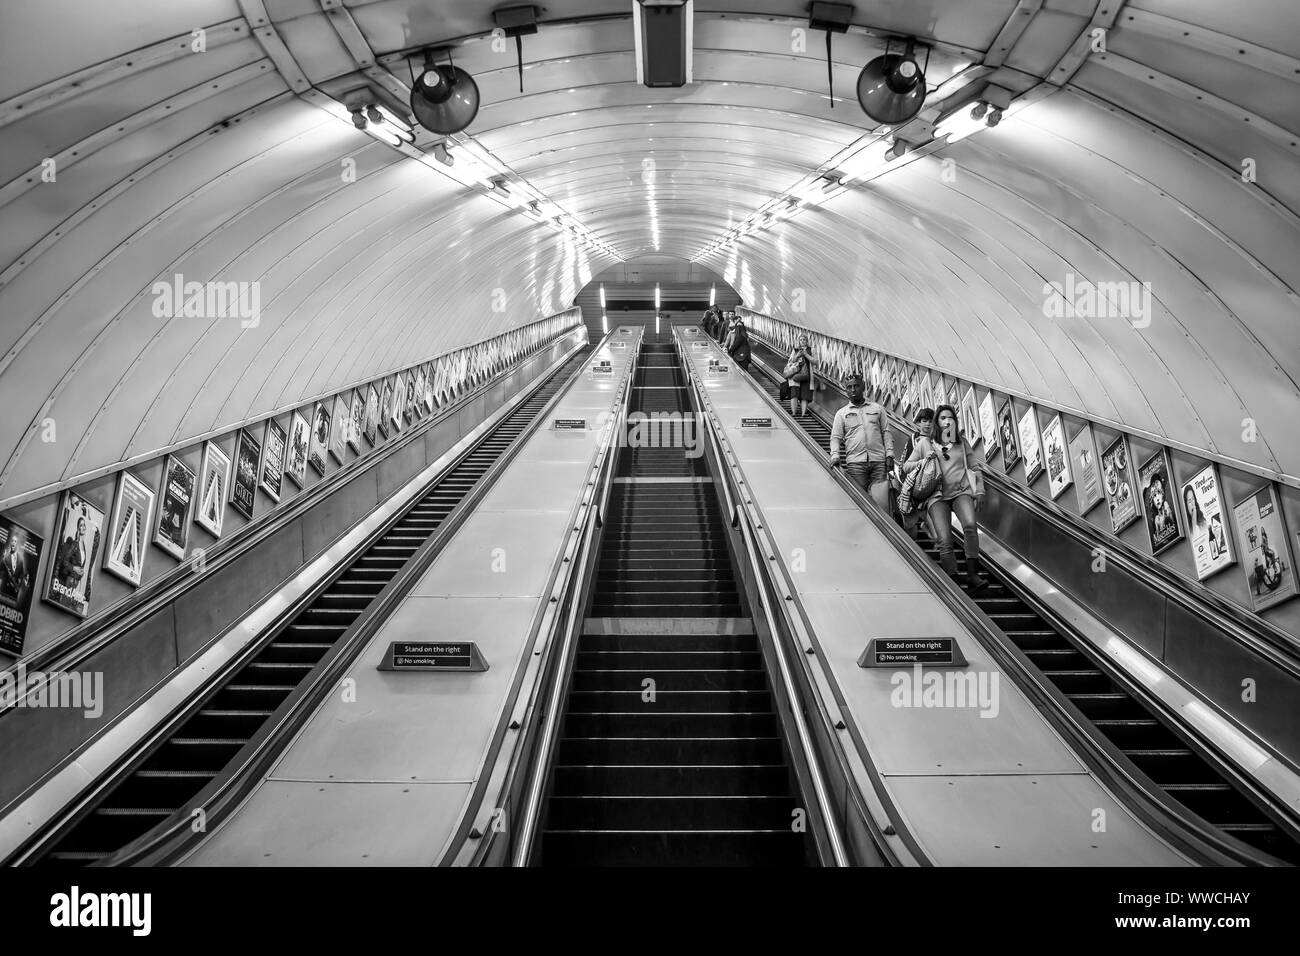 Monochrome view looking up moving escalators inside London Underground Tube station. Black & white front view of passengers travelling down escalator. Stock Photo